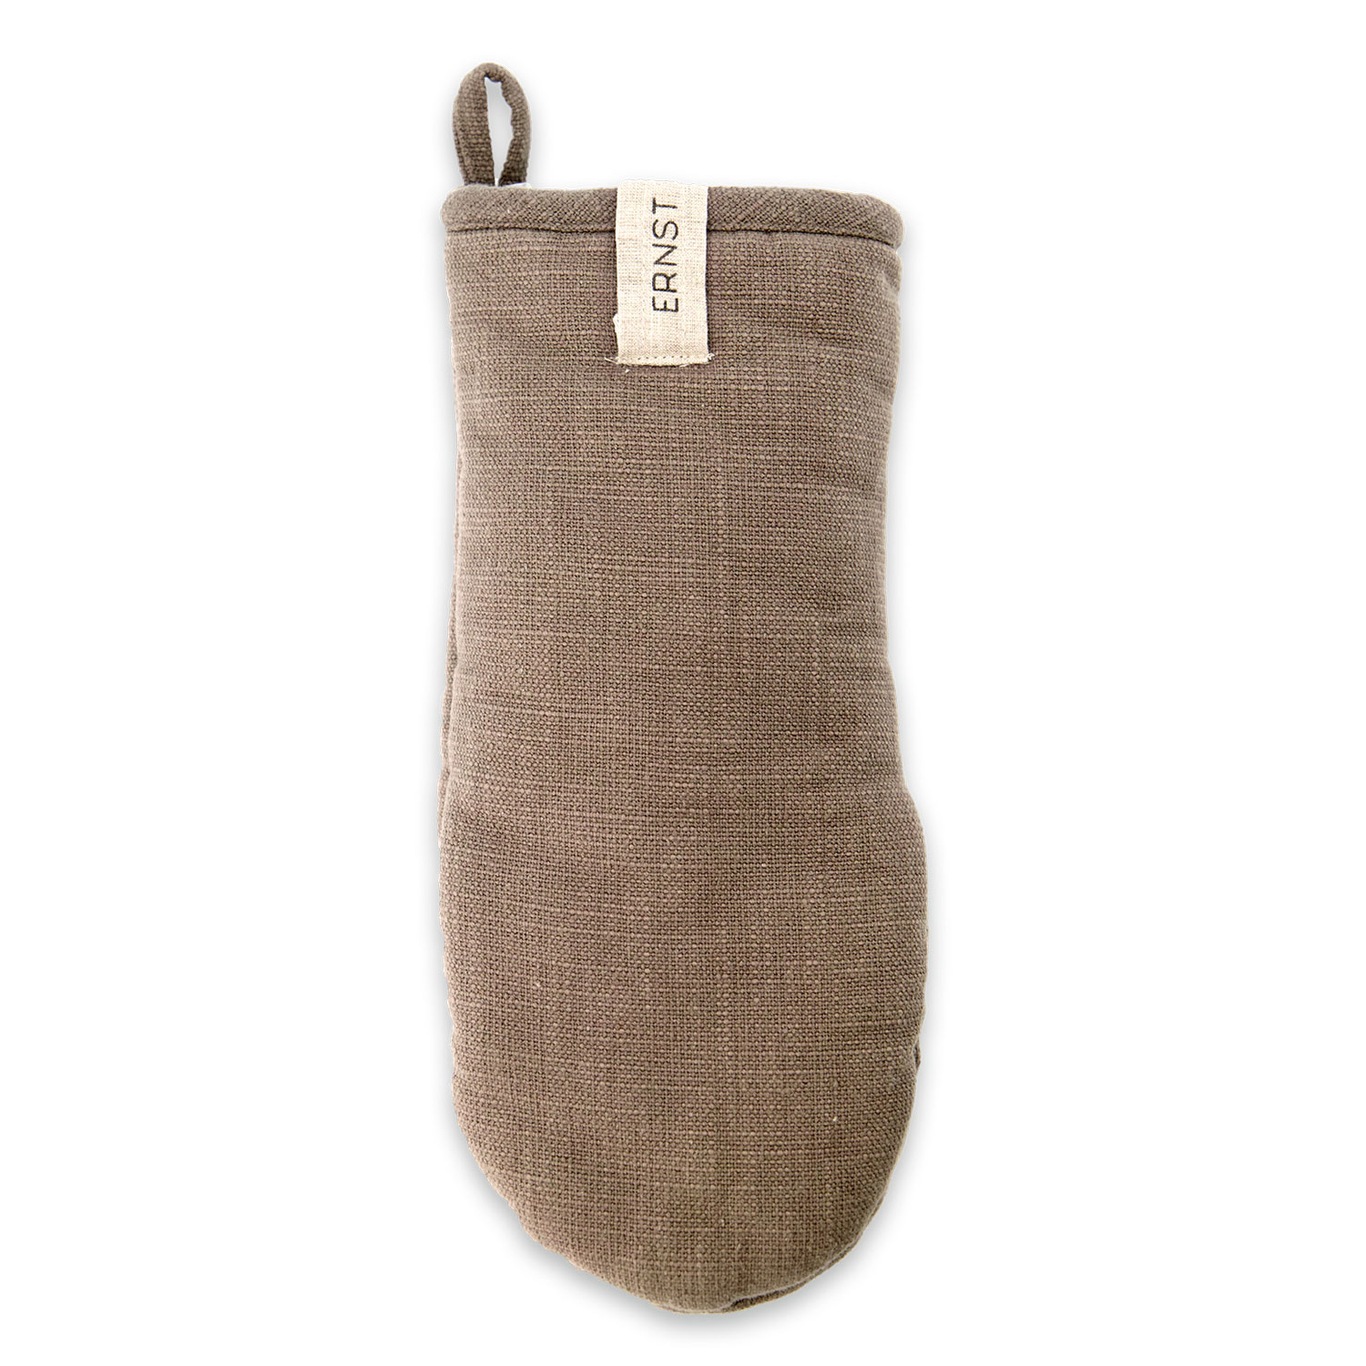 Ovenwant 30x16 cm, Taupe